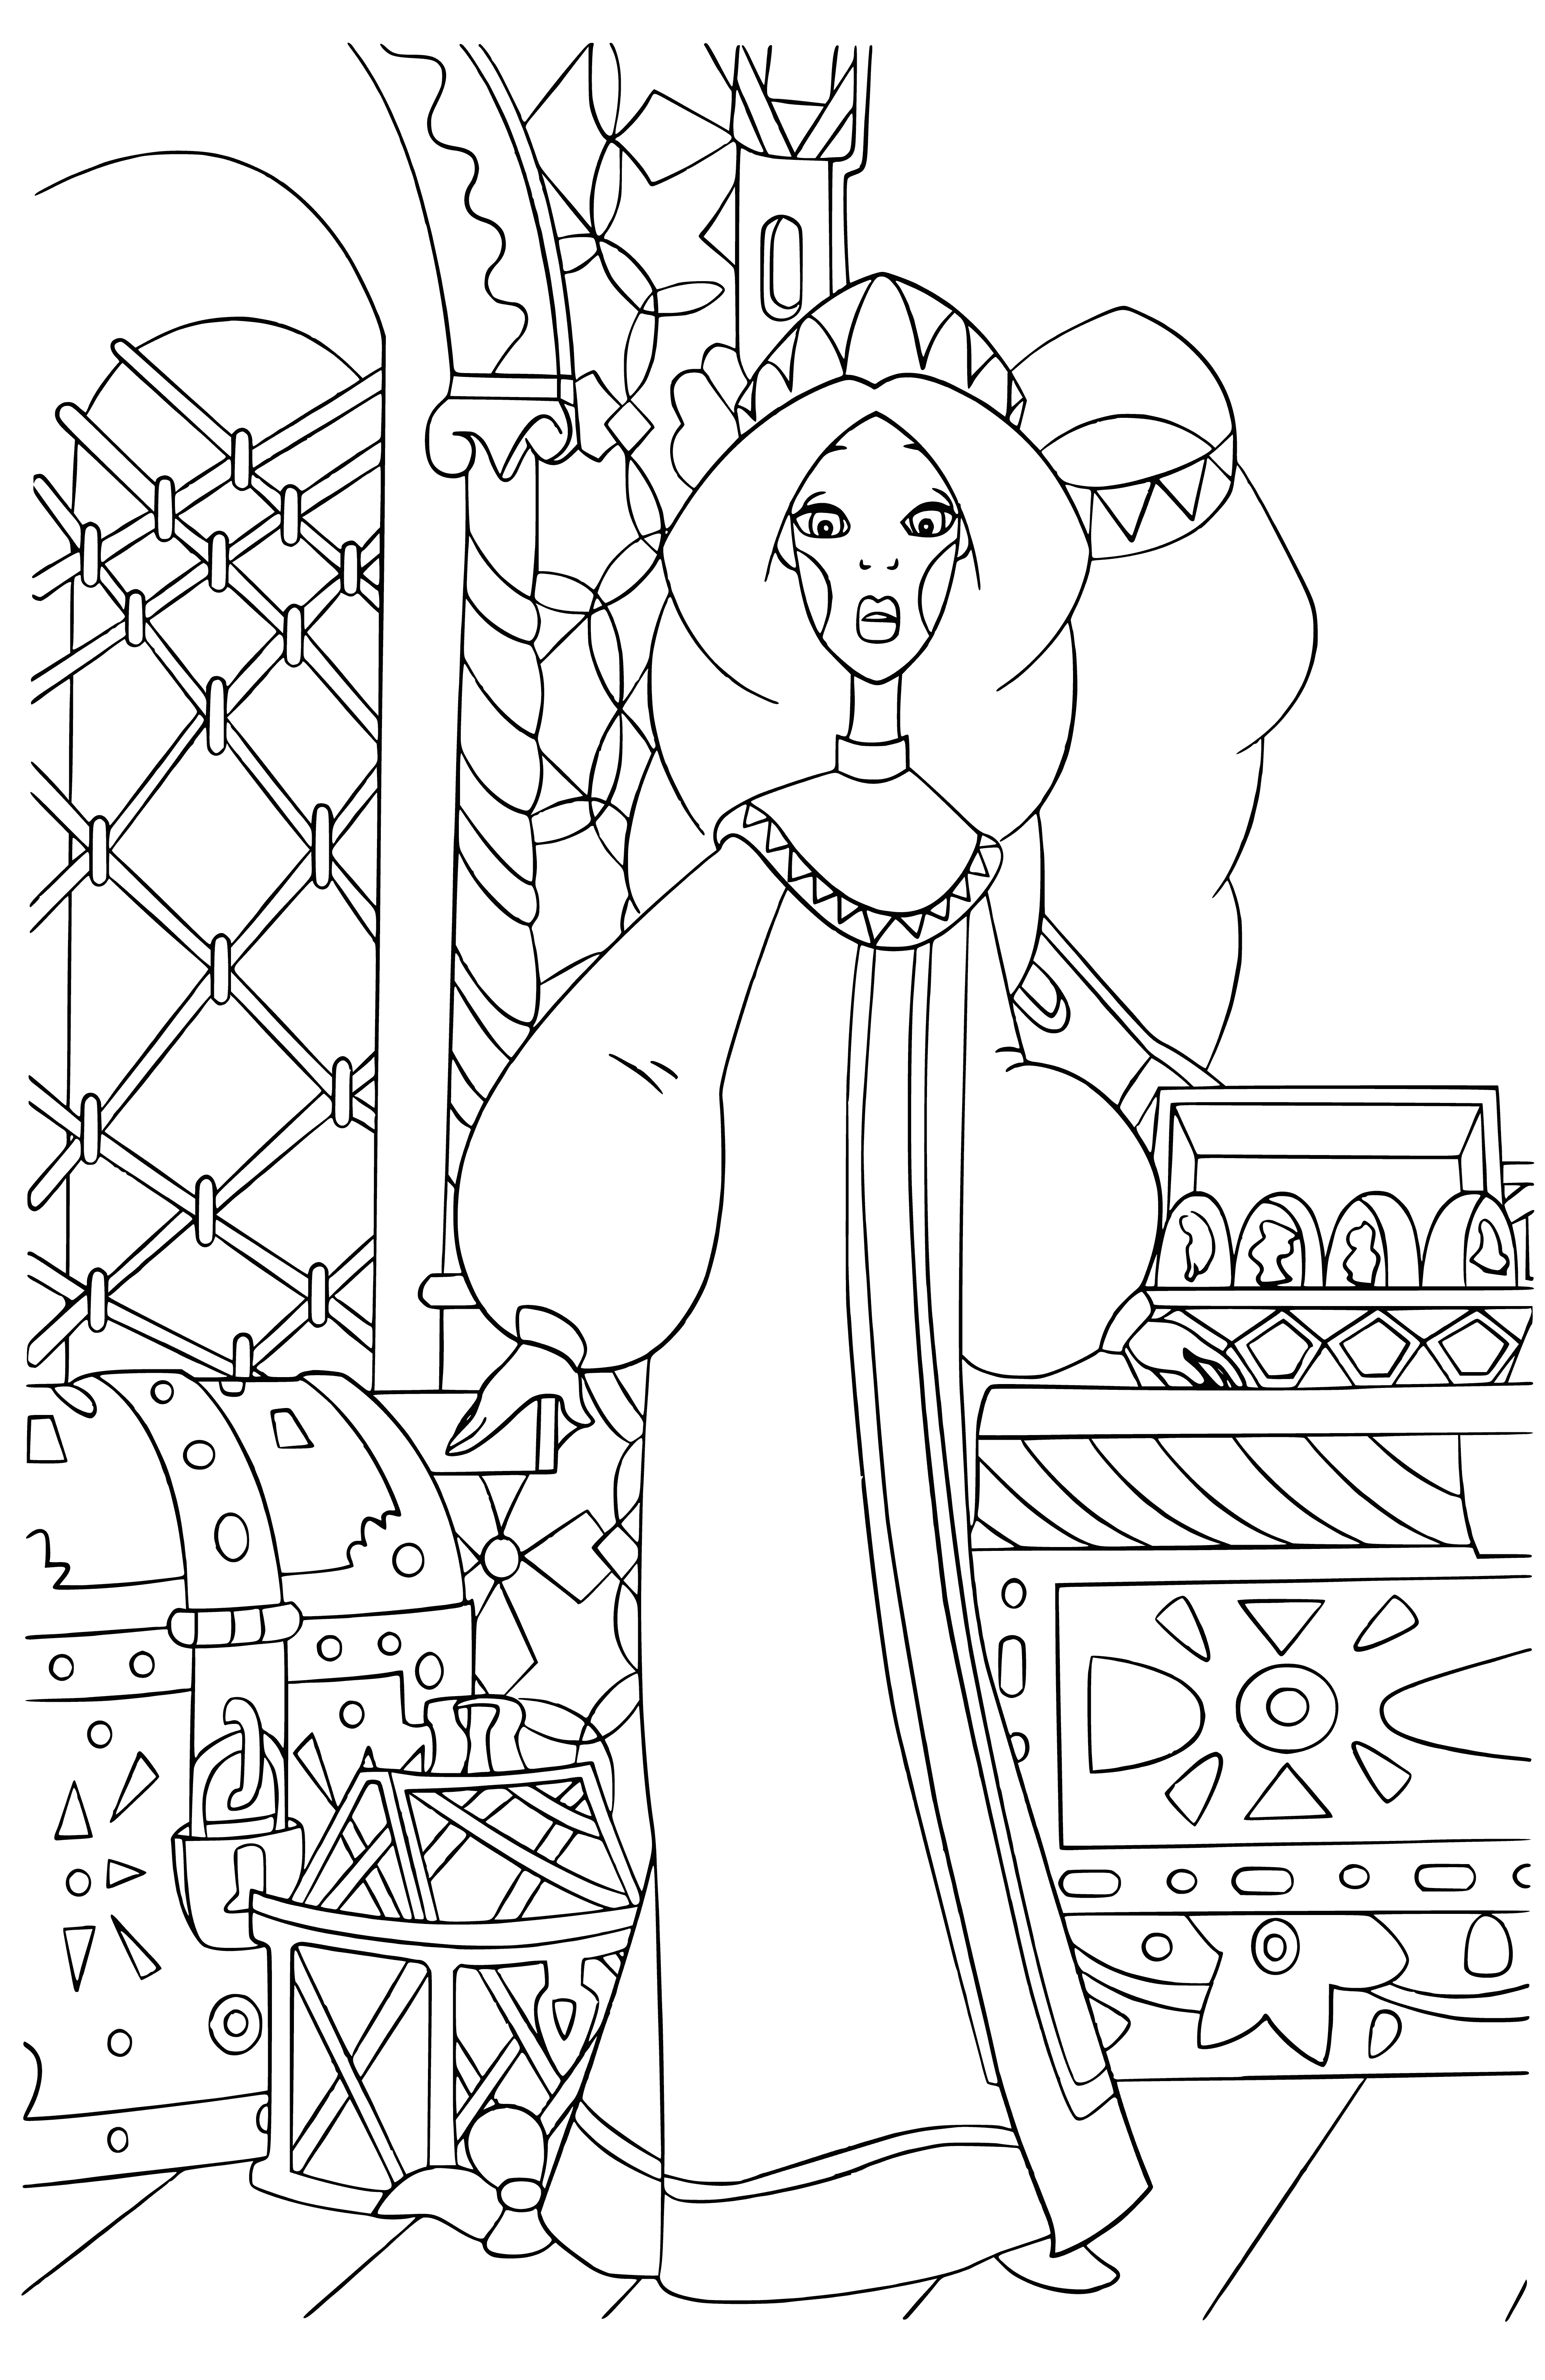 coloring page: Dobrynya Nikitich conquers the three-headed Serpent Gorynych in a legendary Russian folklore tale.